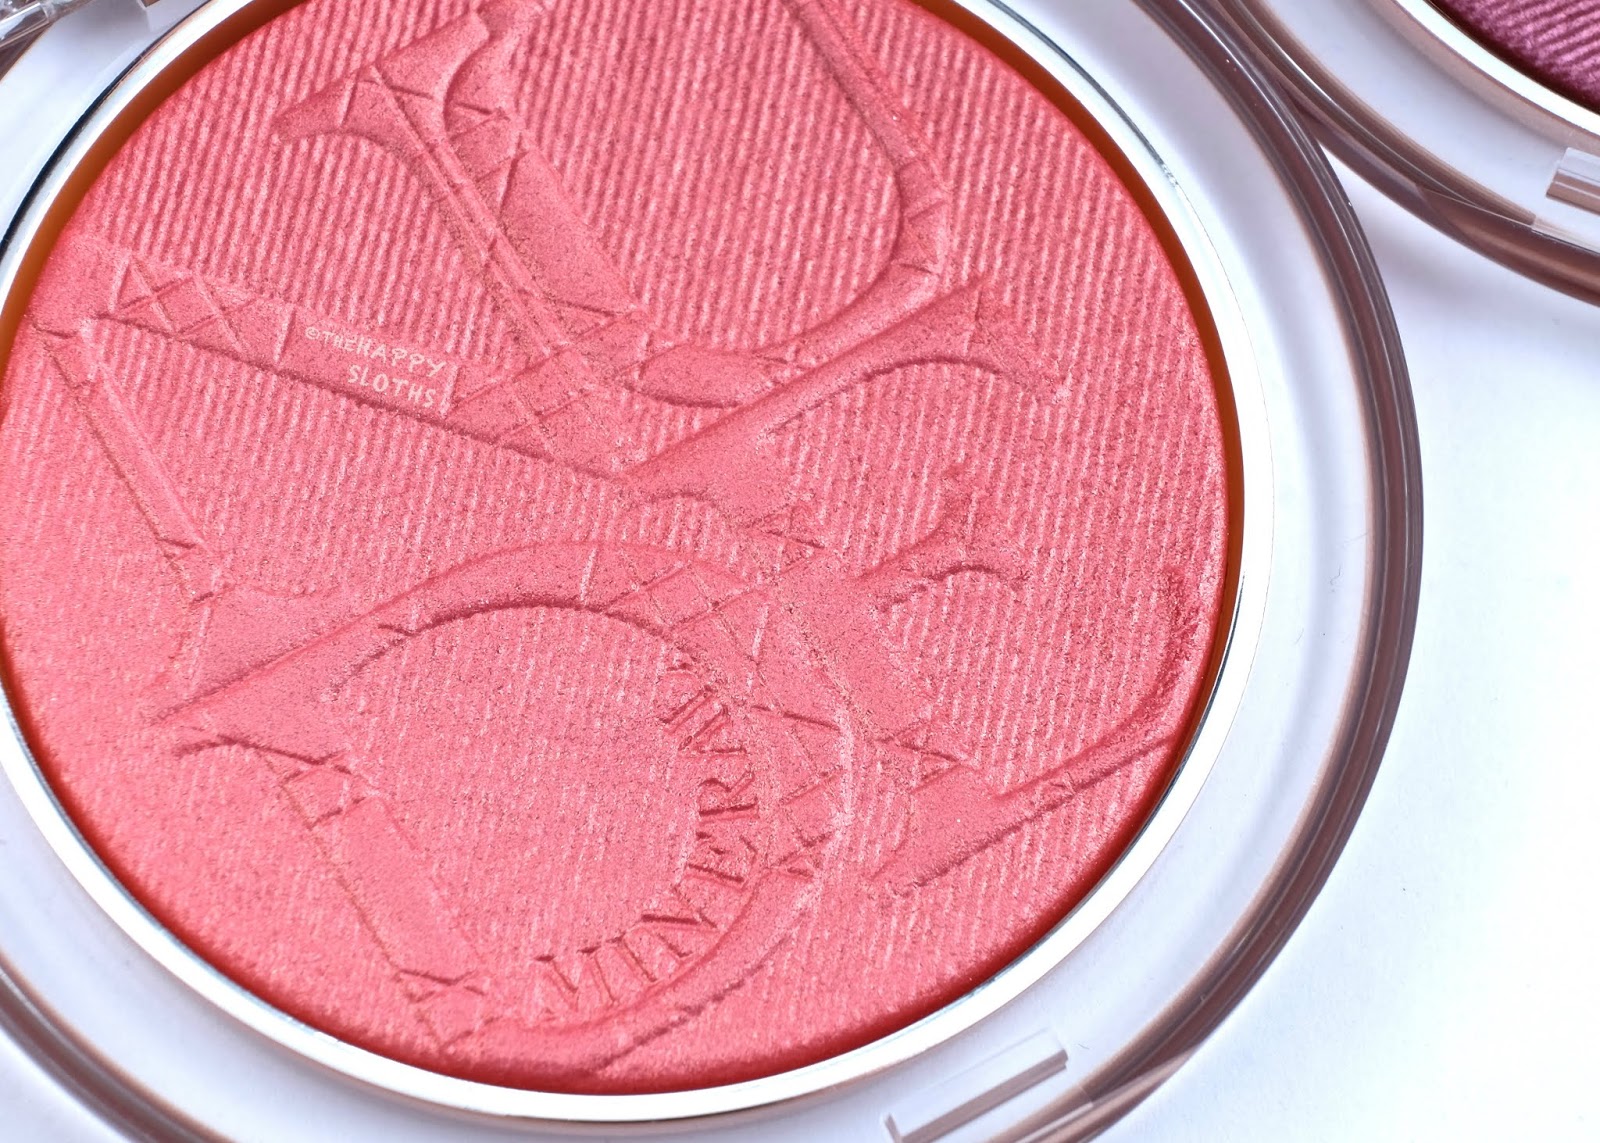 Dior Summer 2019 Wild Earth Collection | Diorskin Nude Luminizer Blush in "10 Coral Pop": Review and Swatches